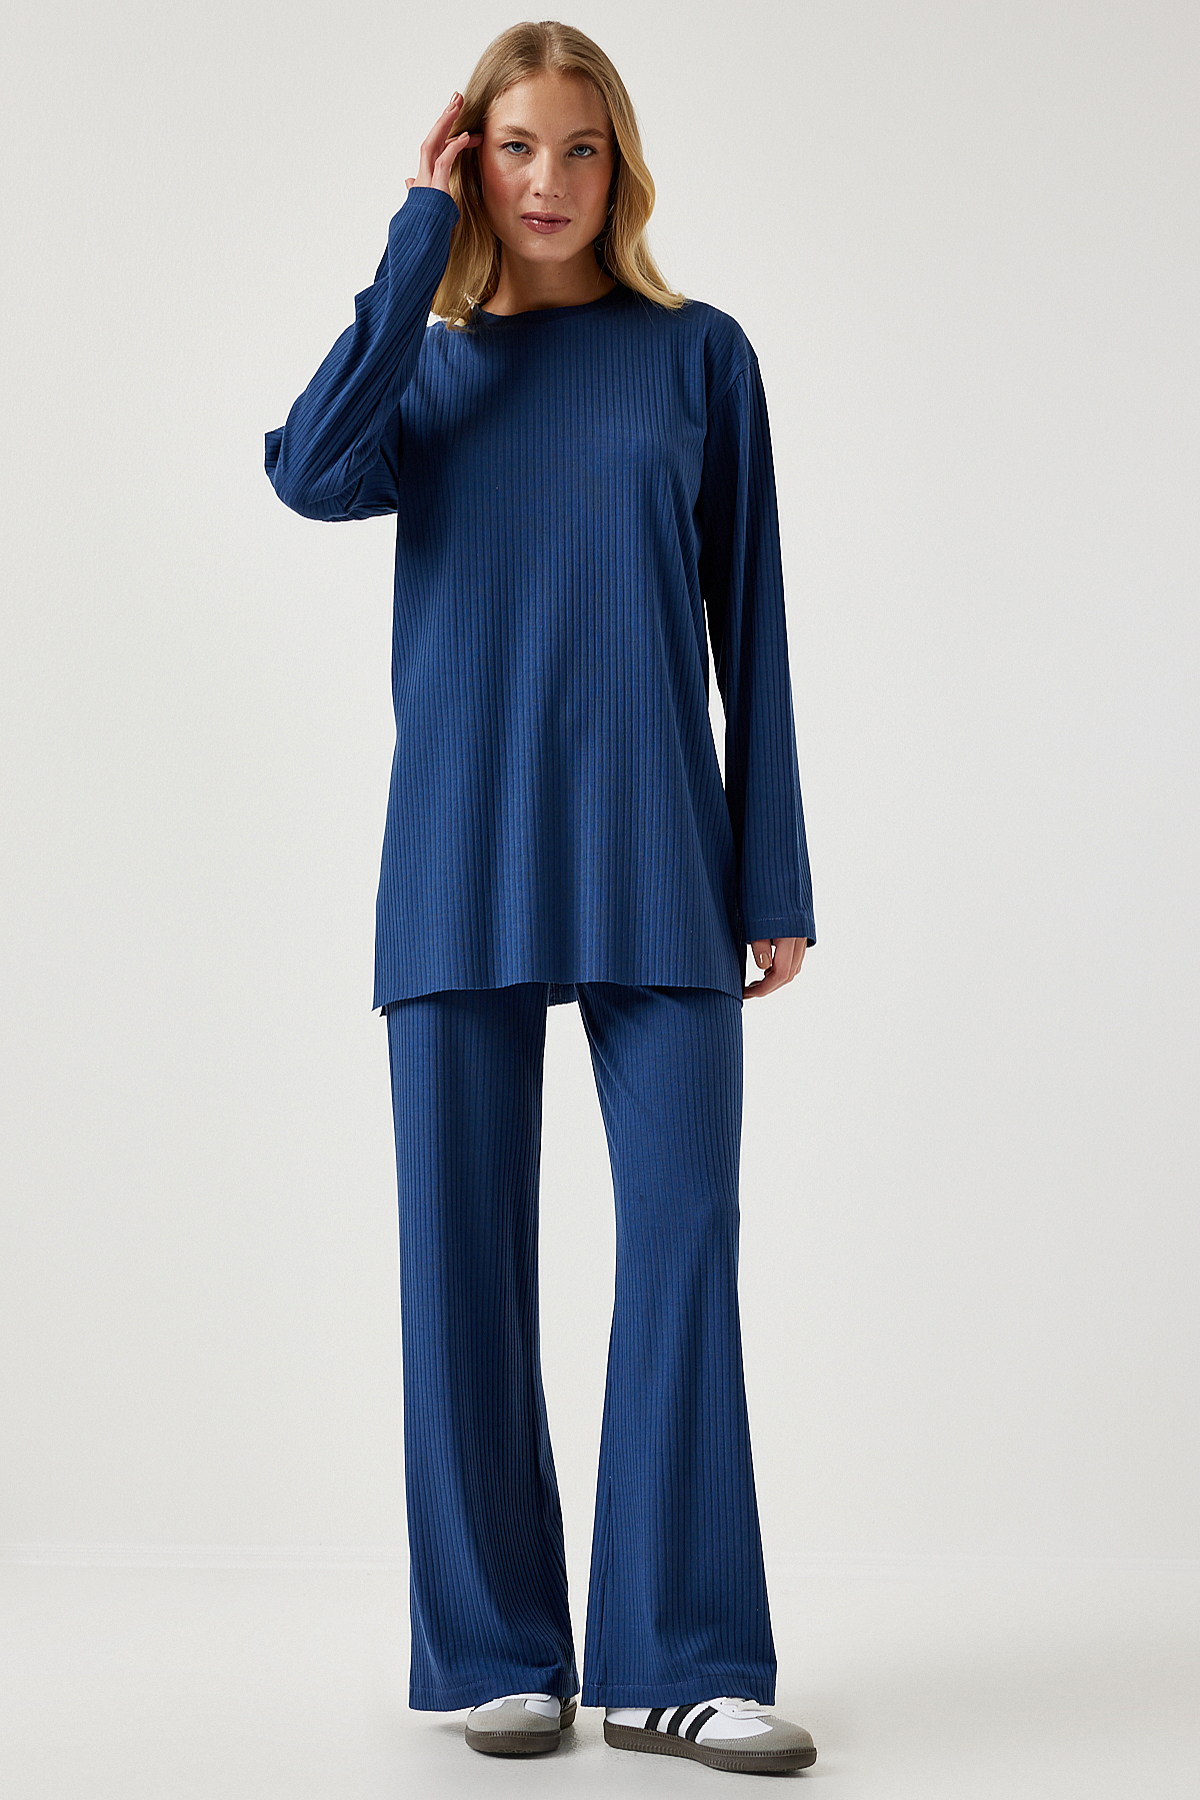 Levně Happiness İstanbul Women's Navy Blue Ribbed Knitted Blouse Pants Suit